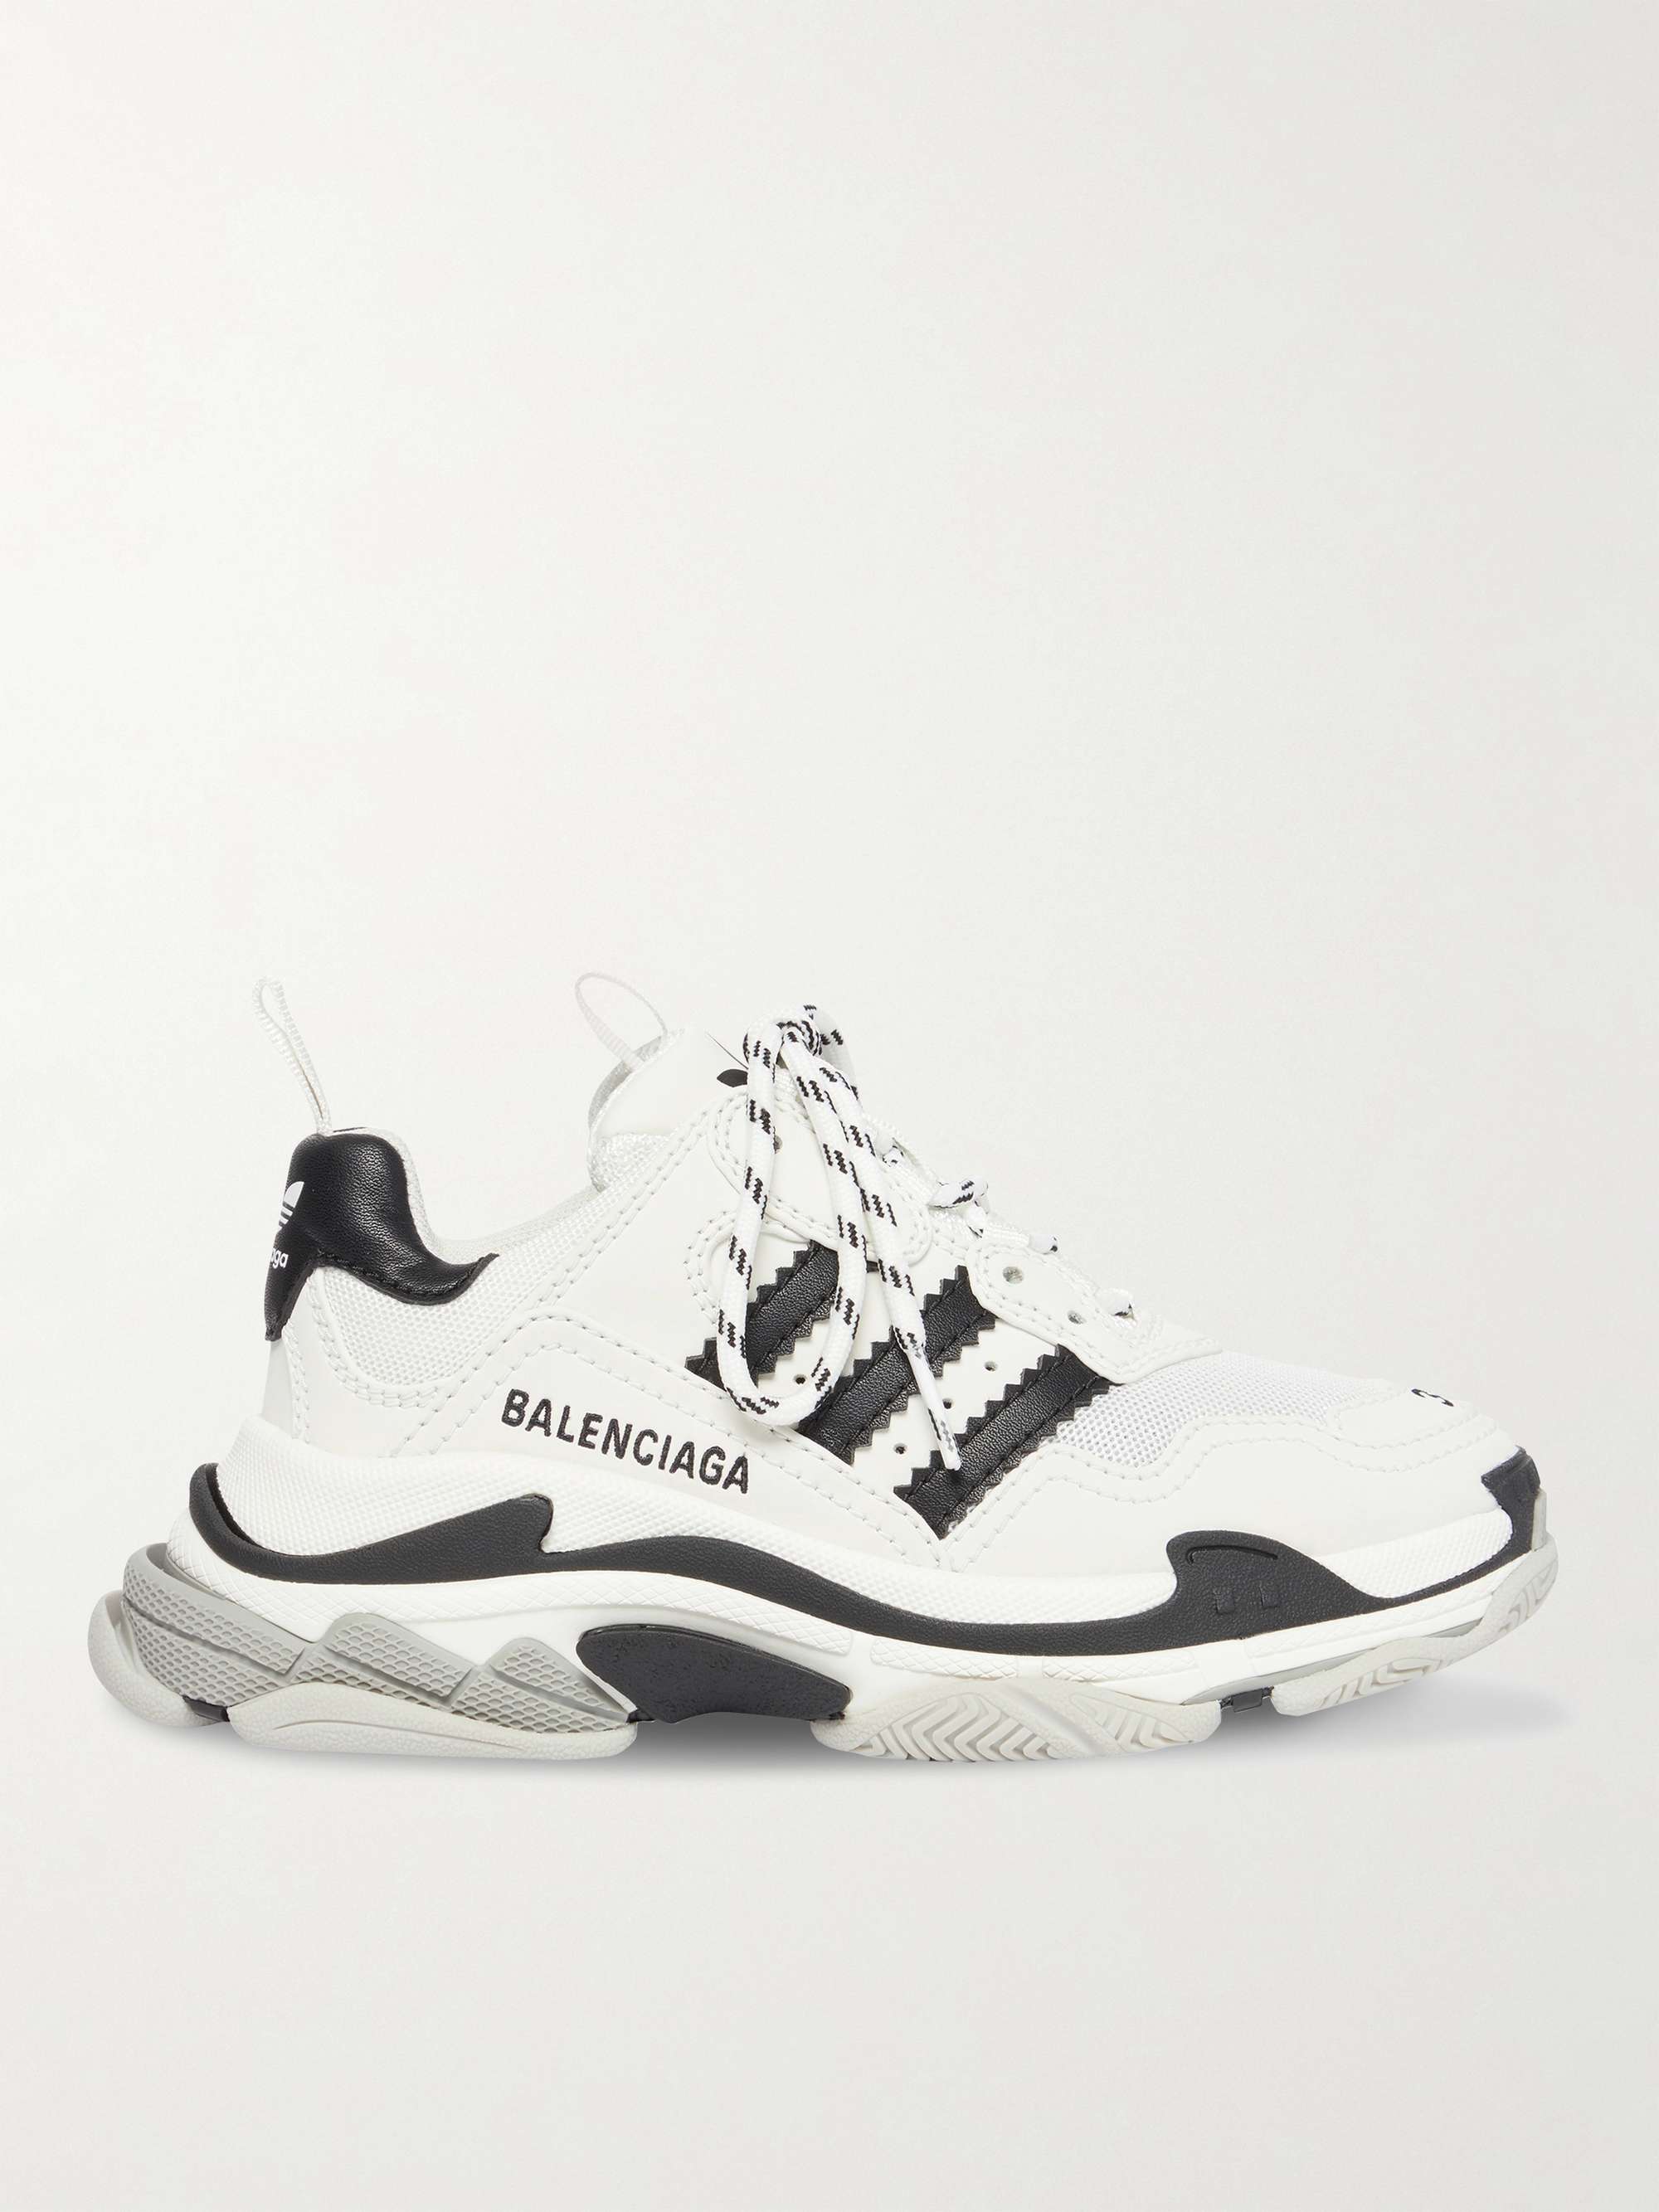 BALENCIAGA + adidas Triple S Leather and Mesh Sneakers | MR PORTER